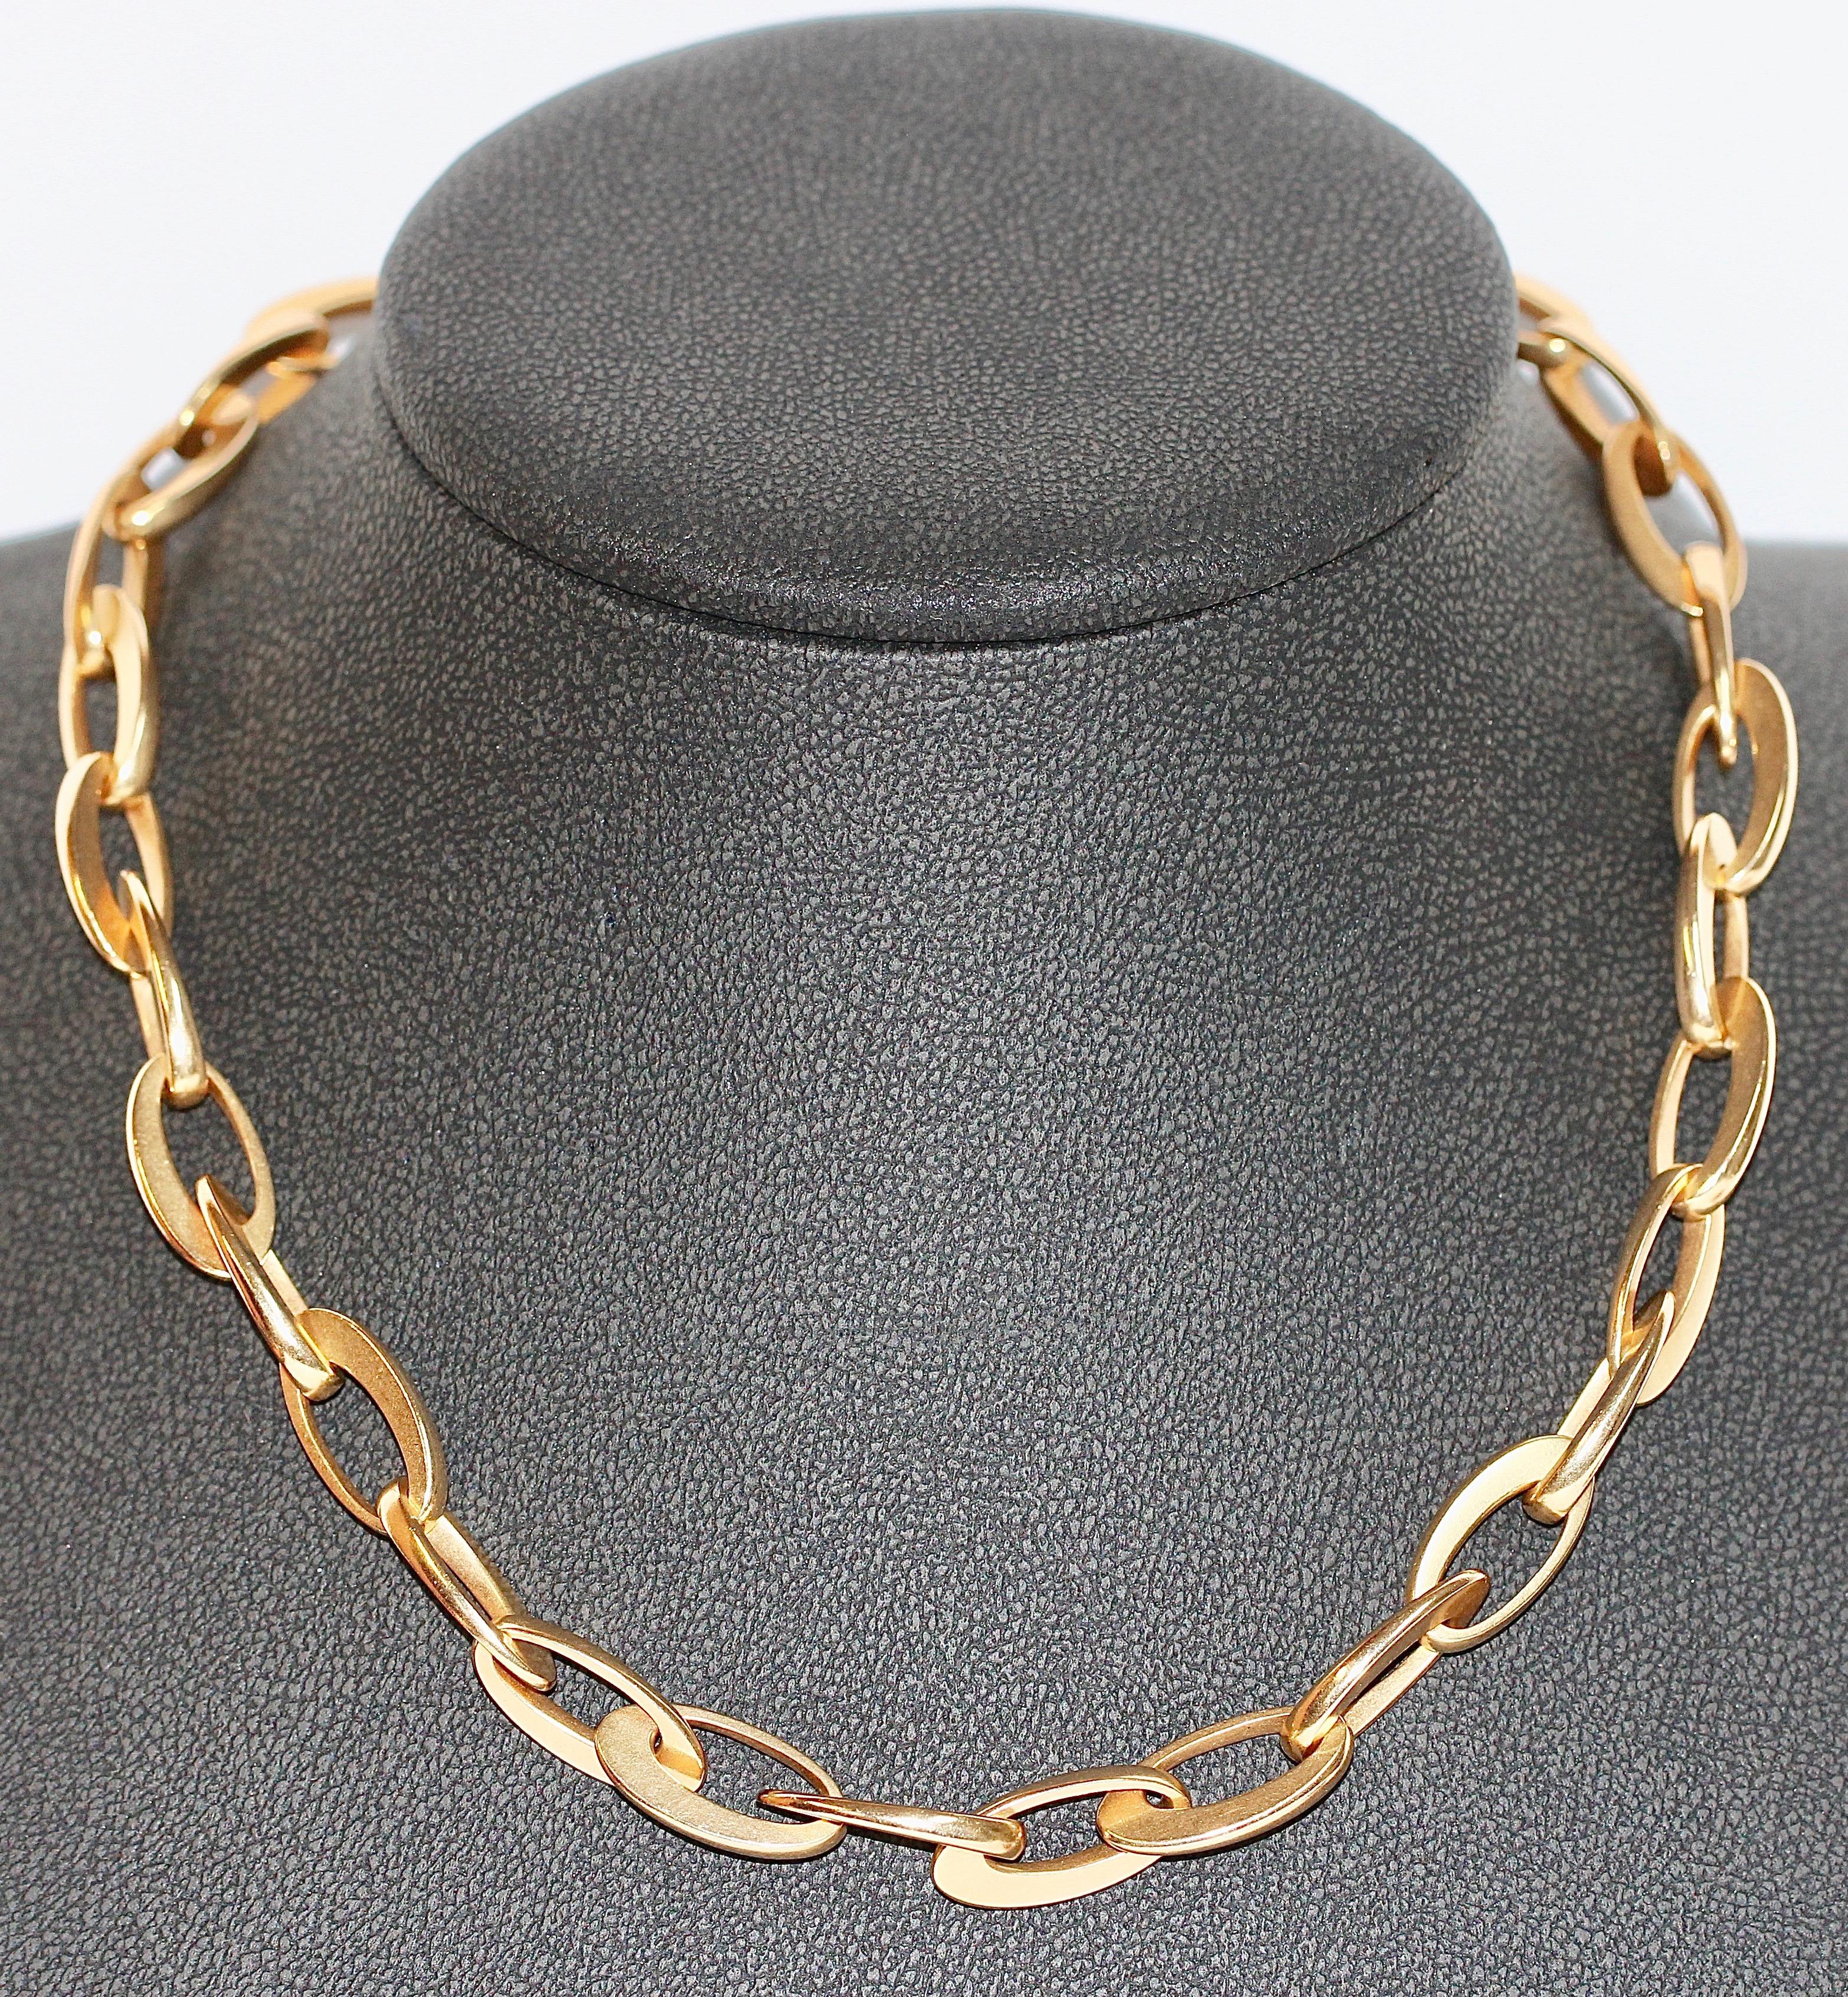 Beautiful designer necklace from Pomellato. 18k gold with diamonds.

Clasp fully set with diamonds.